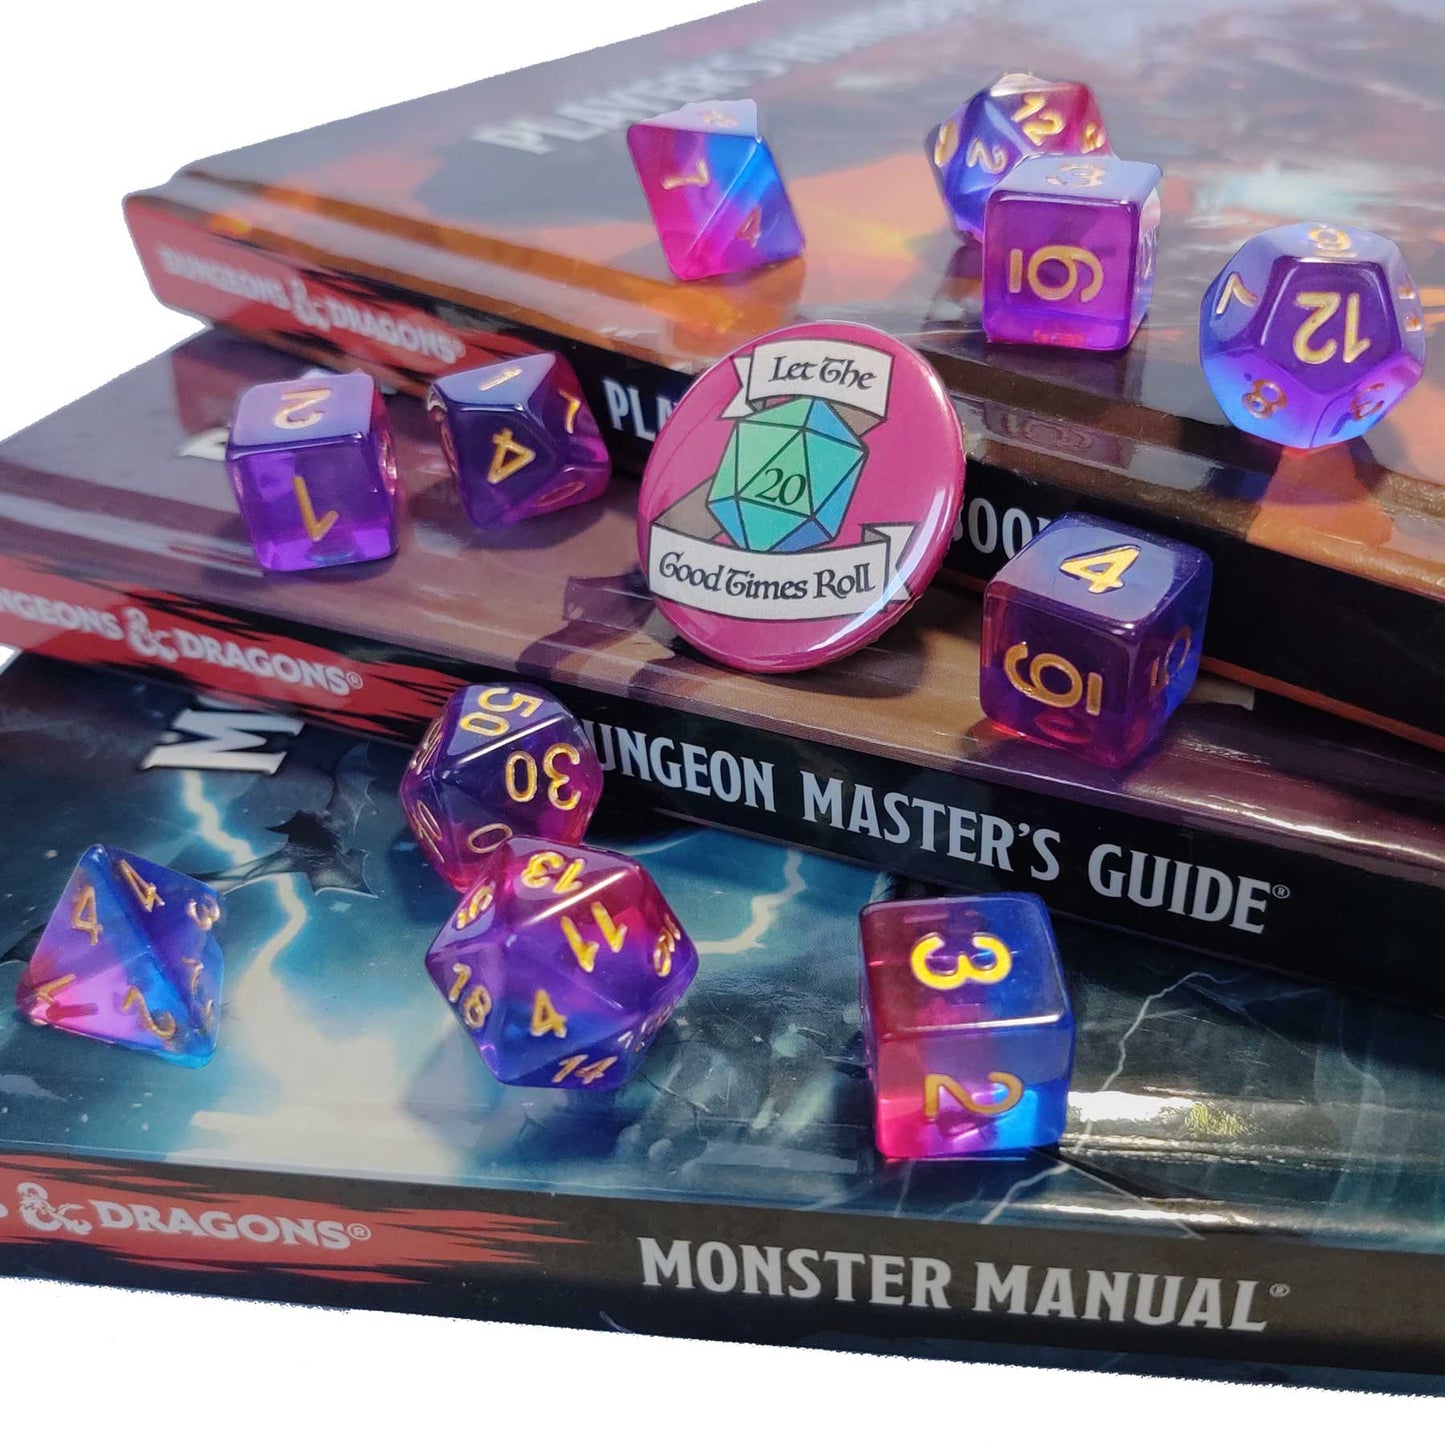 11 piece set of polyhedral dice scattered on a stack of D&D books. They are transparent and colored in the stripes of the bisexual flag with gold ink. There is the freebie “let the good times roll” pinback button among them. 